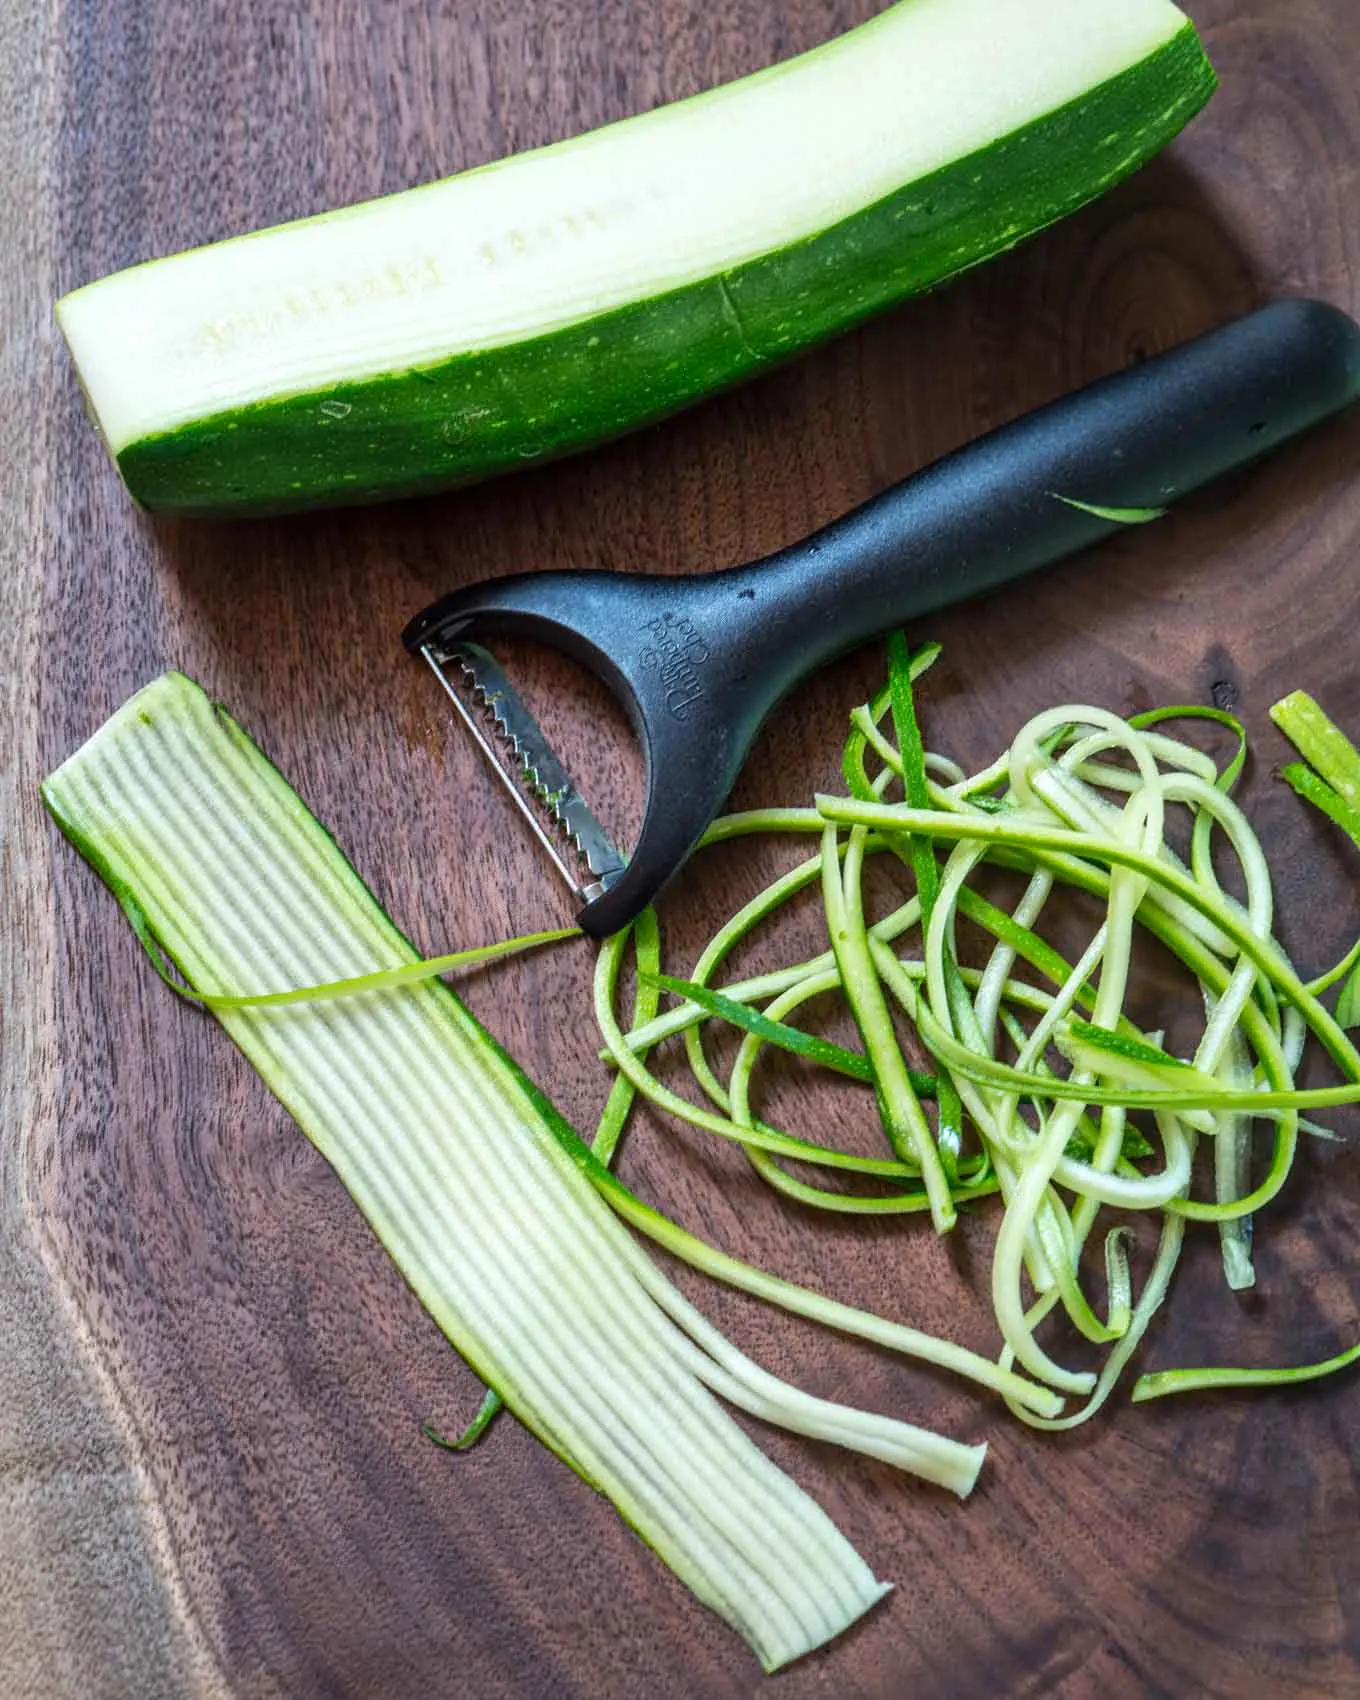  A wooden board topped with sliced zucchini and julienned strips next to the Julien tool.